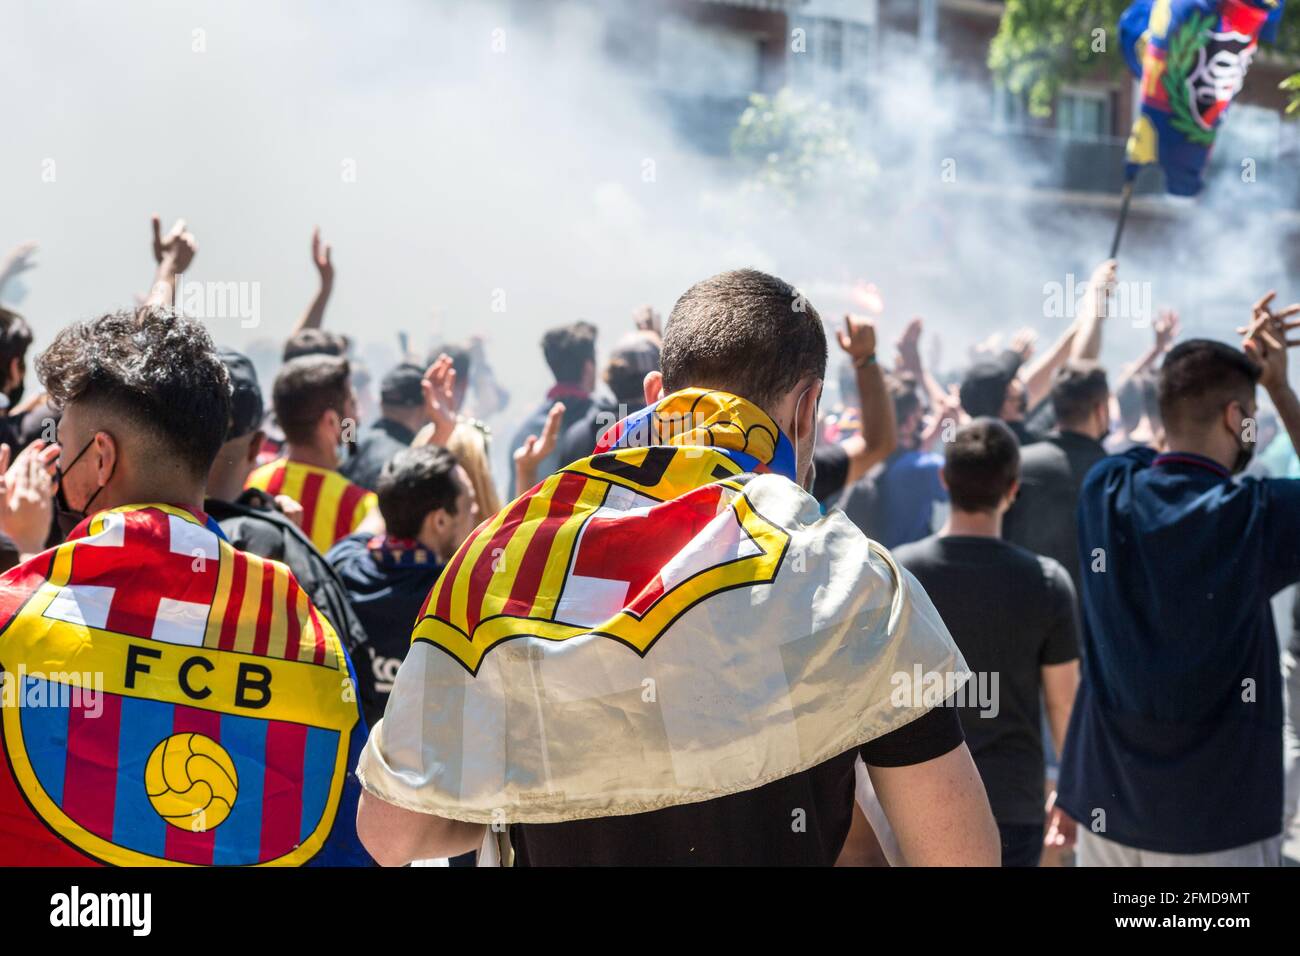 Barcelona, Spain. 08th May, 2021. Fans are seen wrapped with Football Club Barcelona flags. The ultras supporter group of Football Club Barcelona, Boixos Nois (Crazy Boys) have gathered outside the Camp Nou stadium to motivate the team before the match against Club Atletico de Madrid for the 35th round of La Liga, the Spanish football league. Barça's victory will put the team, currently in third place, ahead of Atletico de Madrid, which occupies the first position. Credit: SOPA Images Limited/Alamy Live News Stock Photo